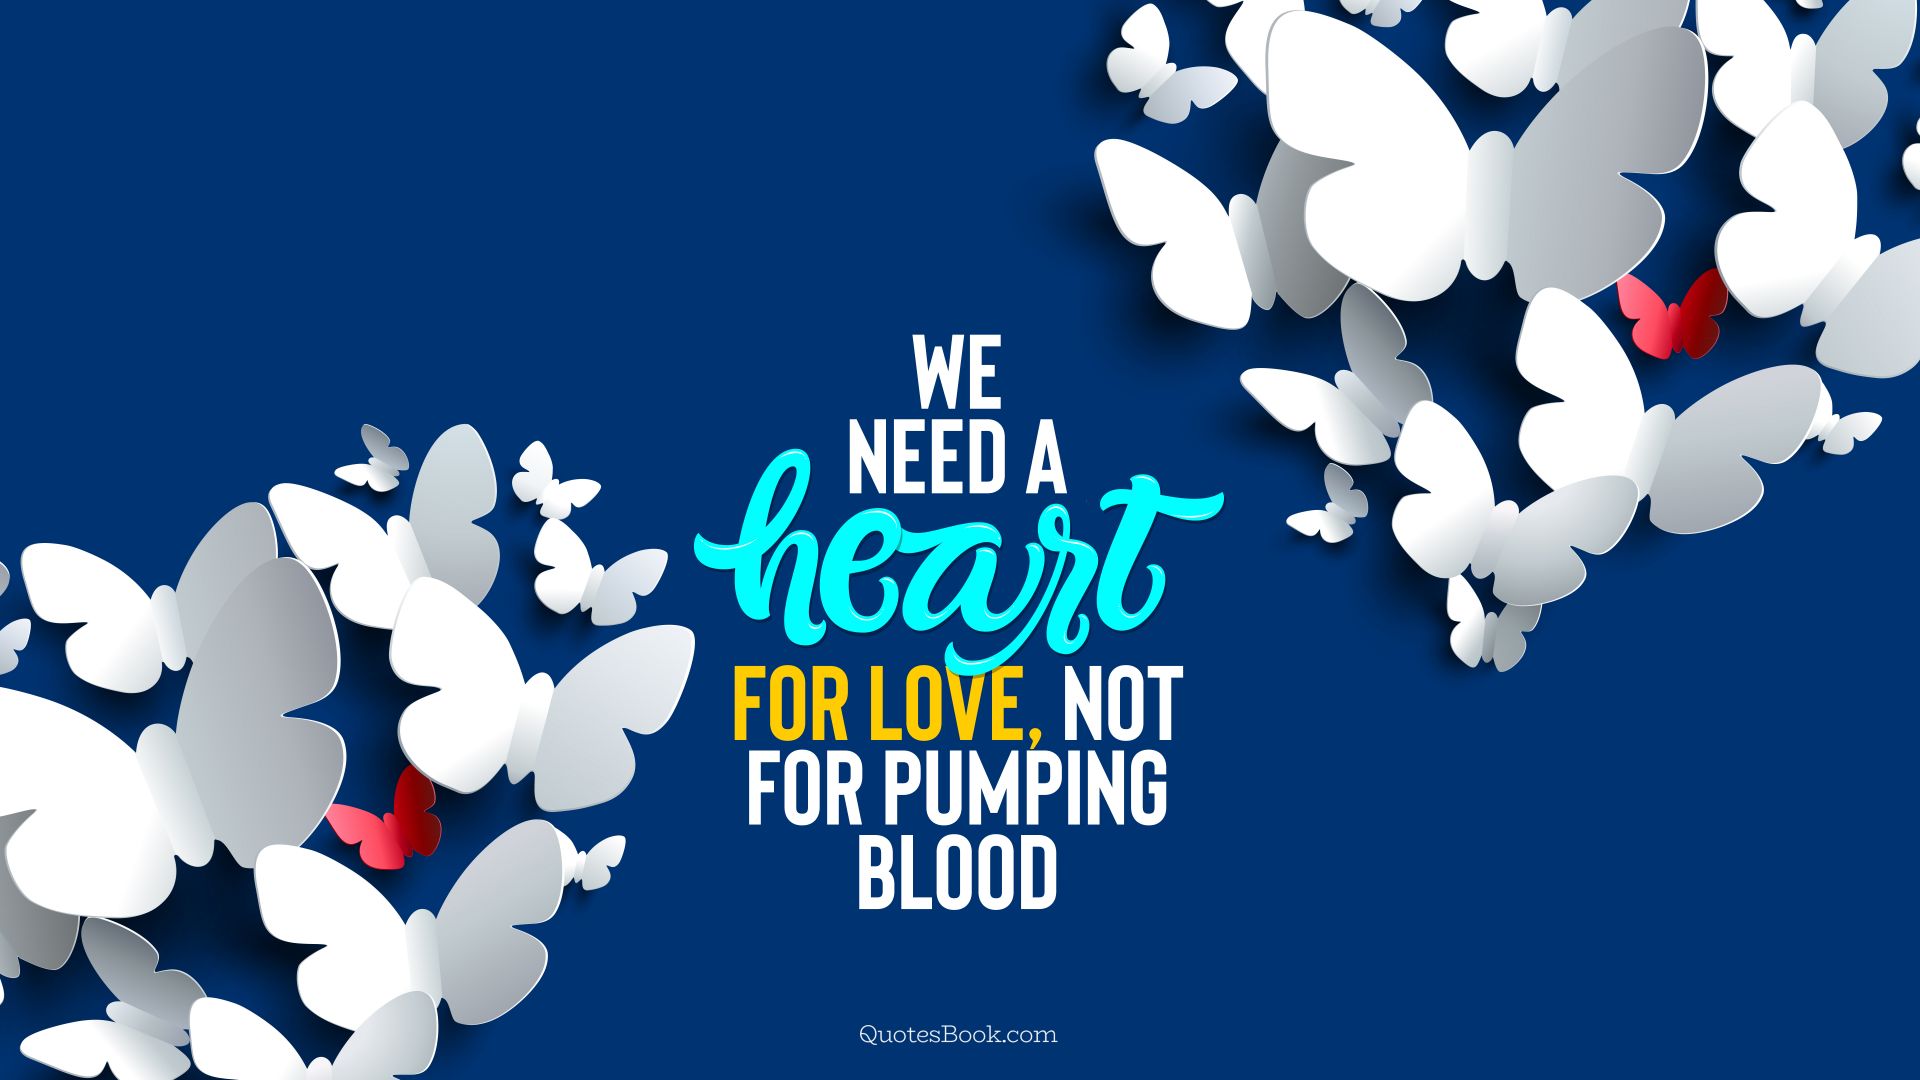 We need a heart for love, not for pumping blood. - Quote by QuotesBook